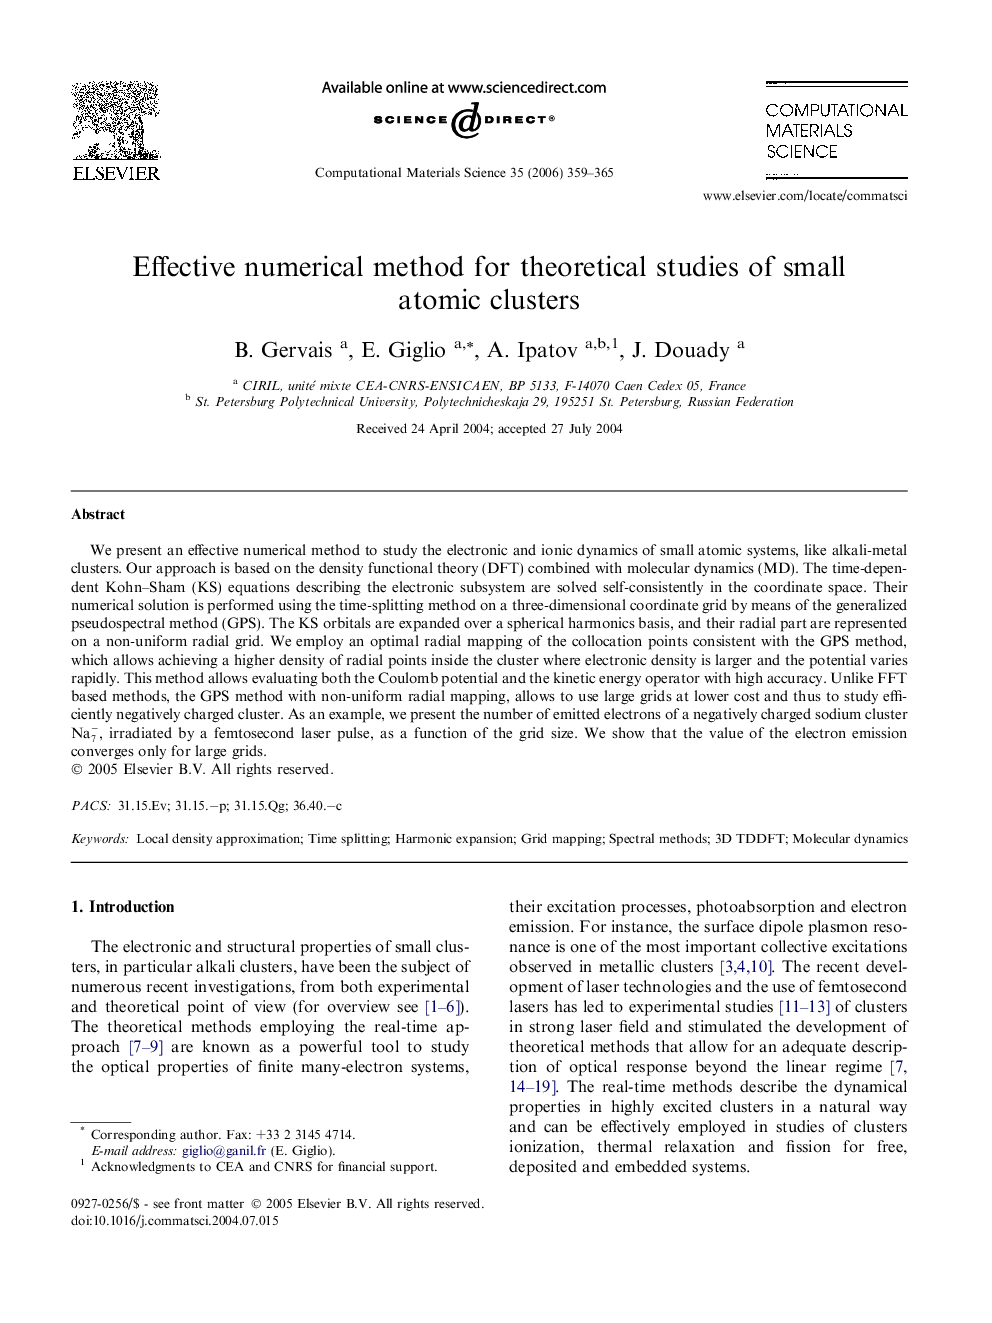 Effective numerical method for theoretical studies of small atomic clusters